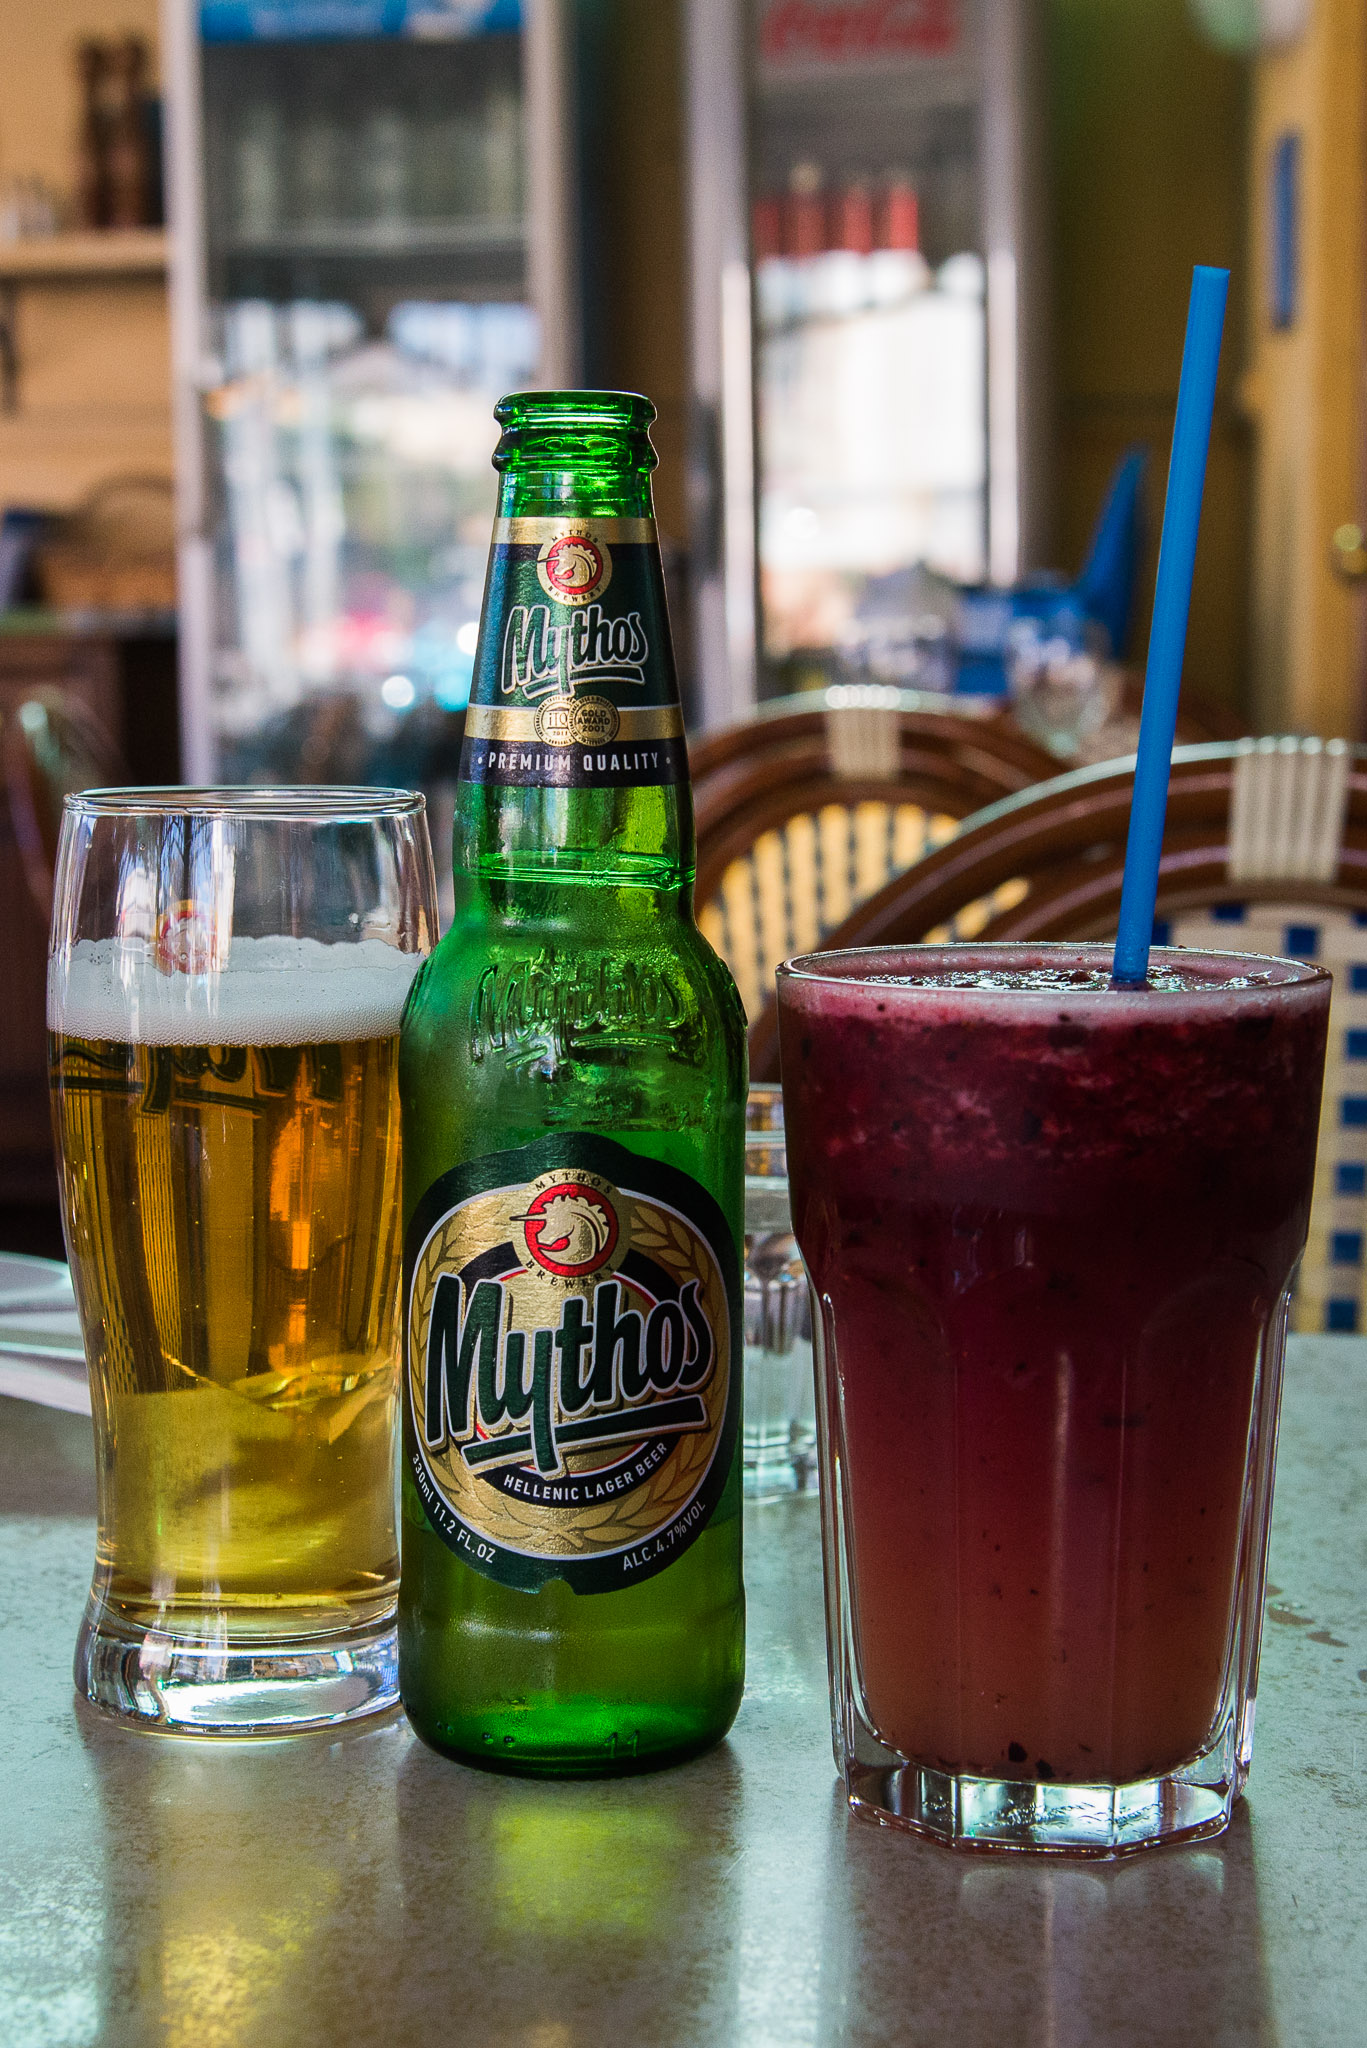 Mythos lager (AU$8.50), Spartan Crush (mixed berries mocktail with a dash of pineapple and apple juice (AU$9.80)